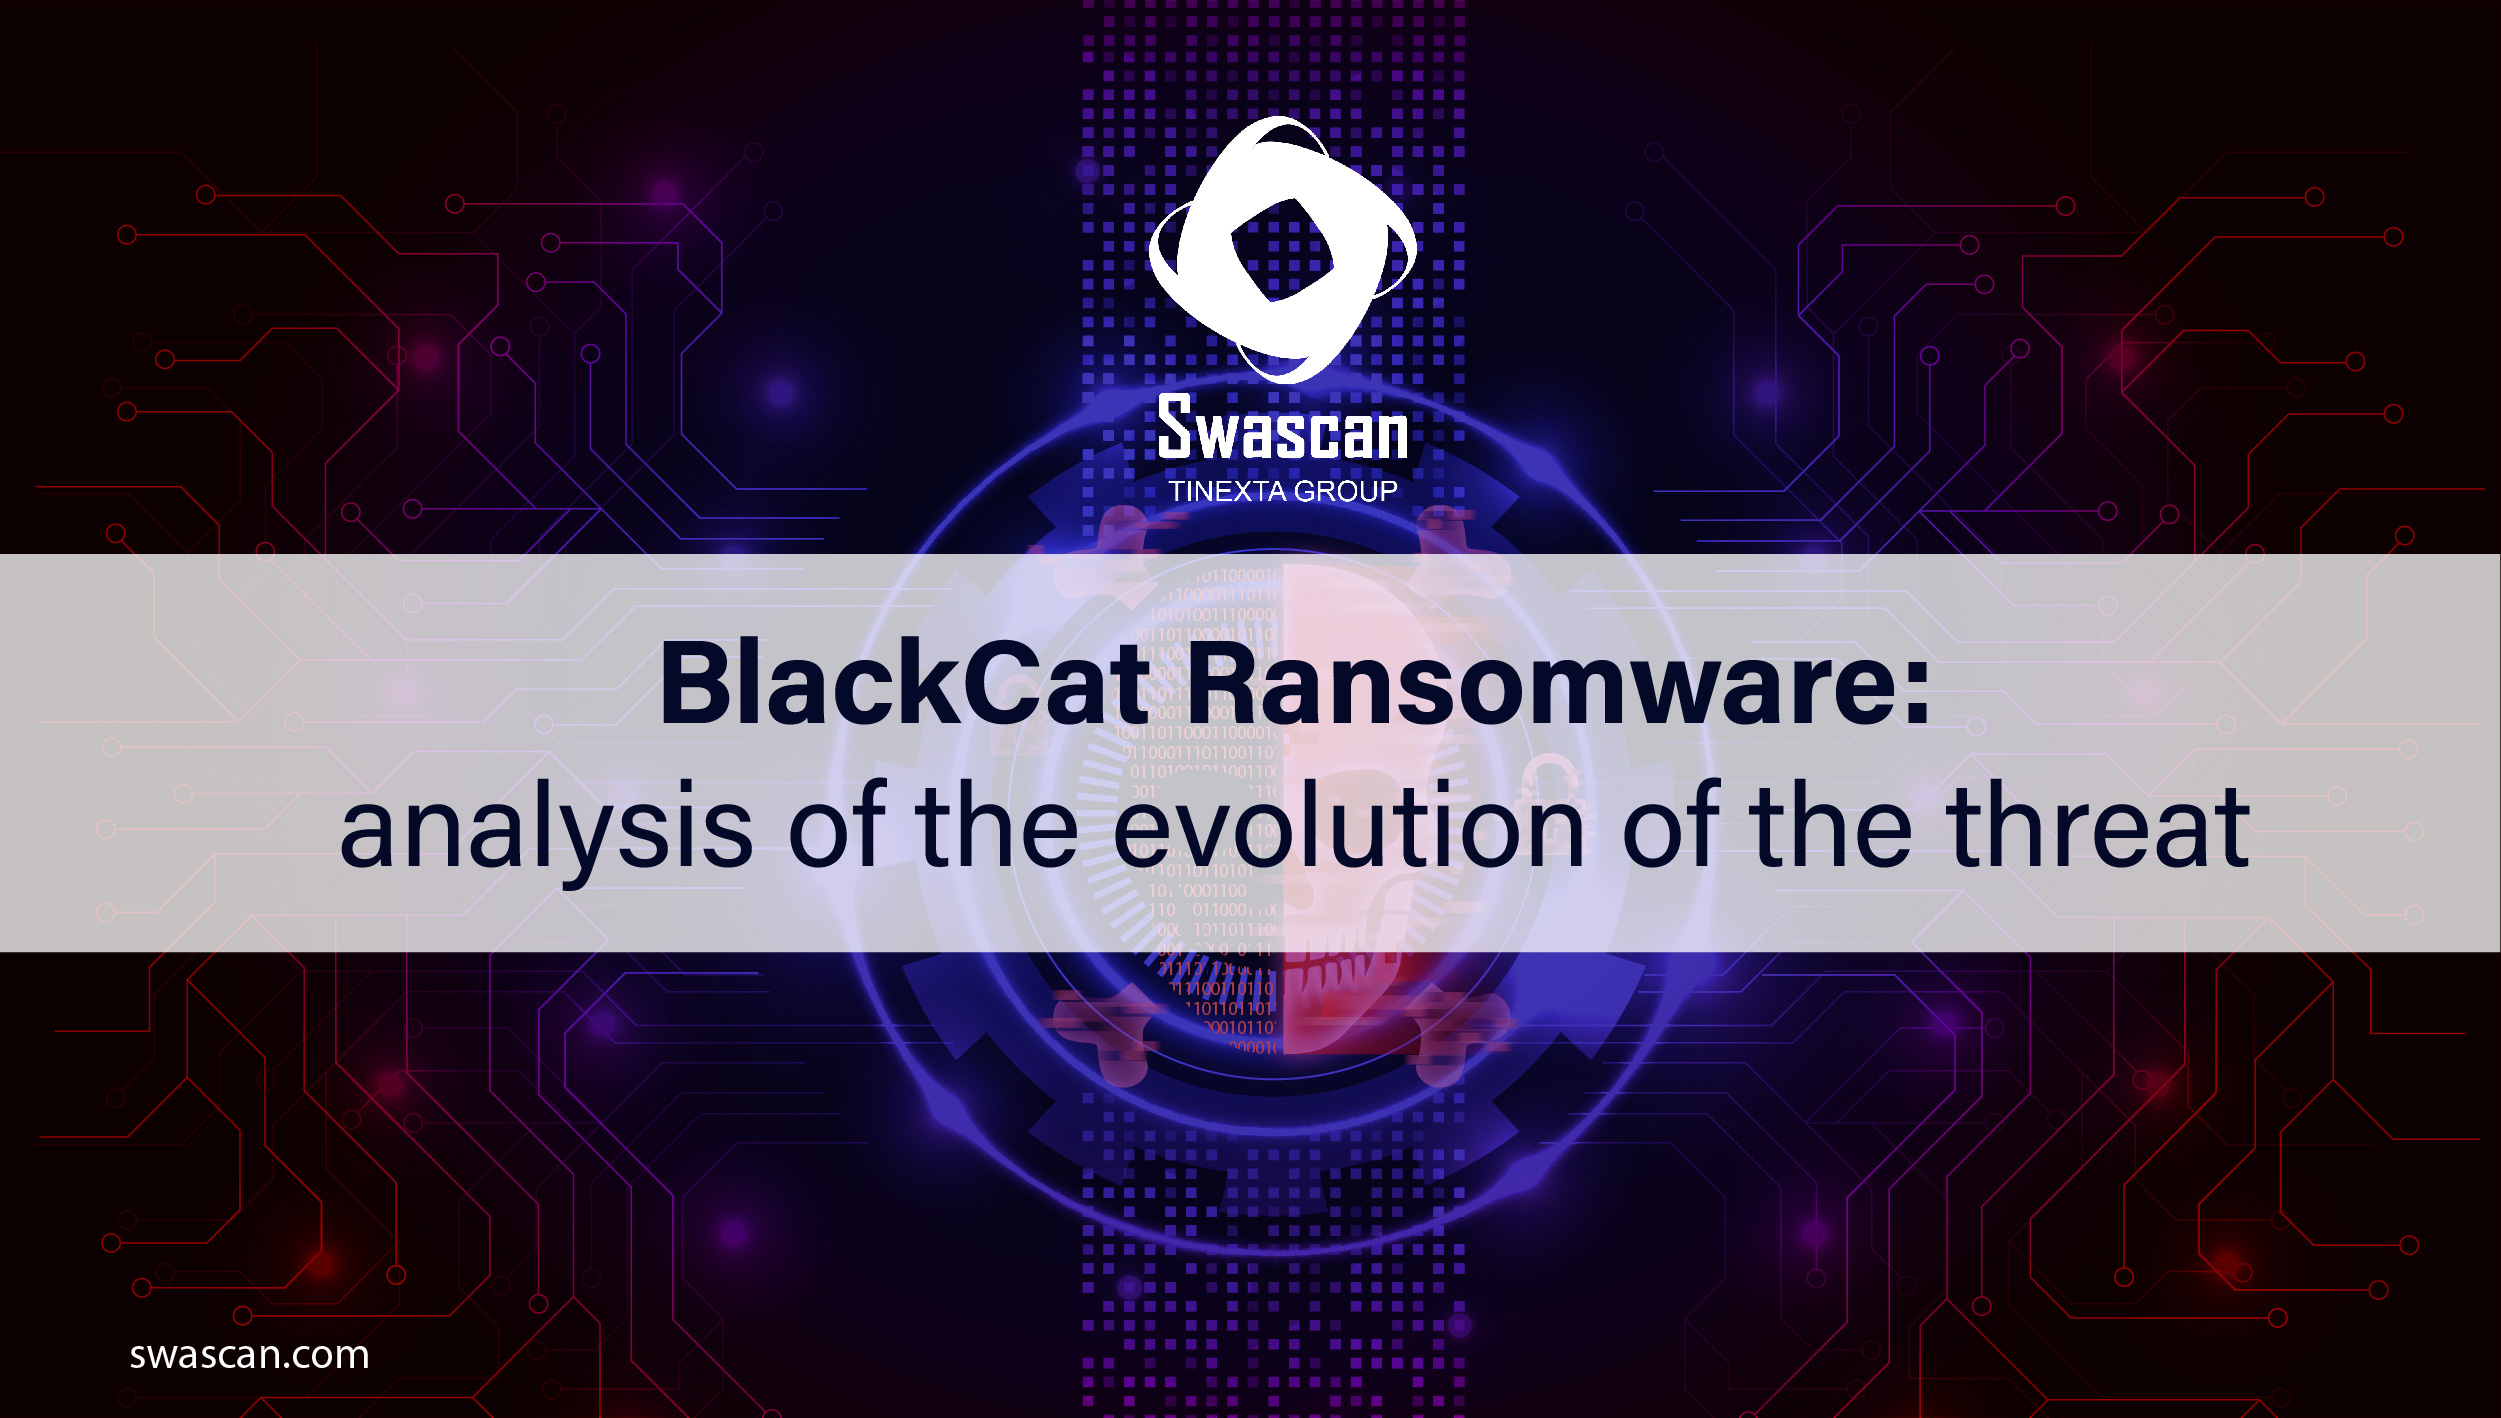 BlackCat Ransomware: analysis of the evolution of the threat